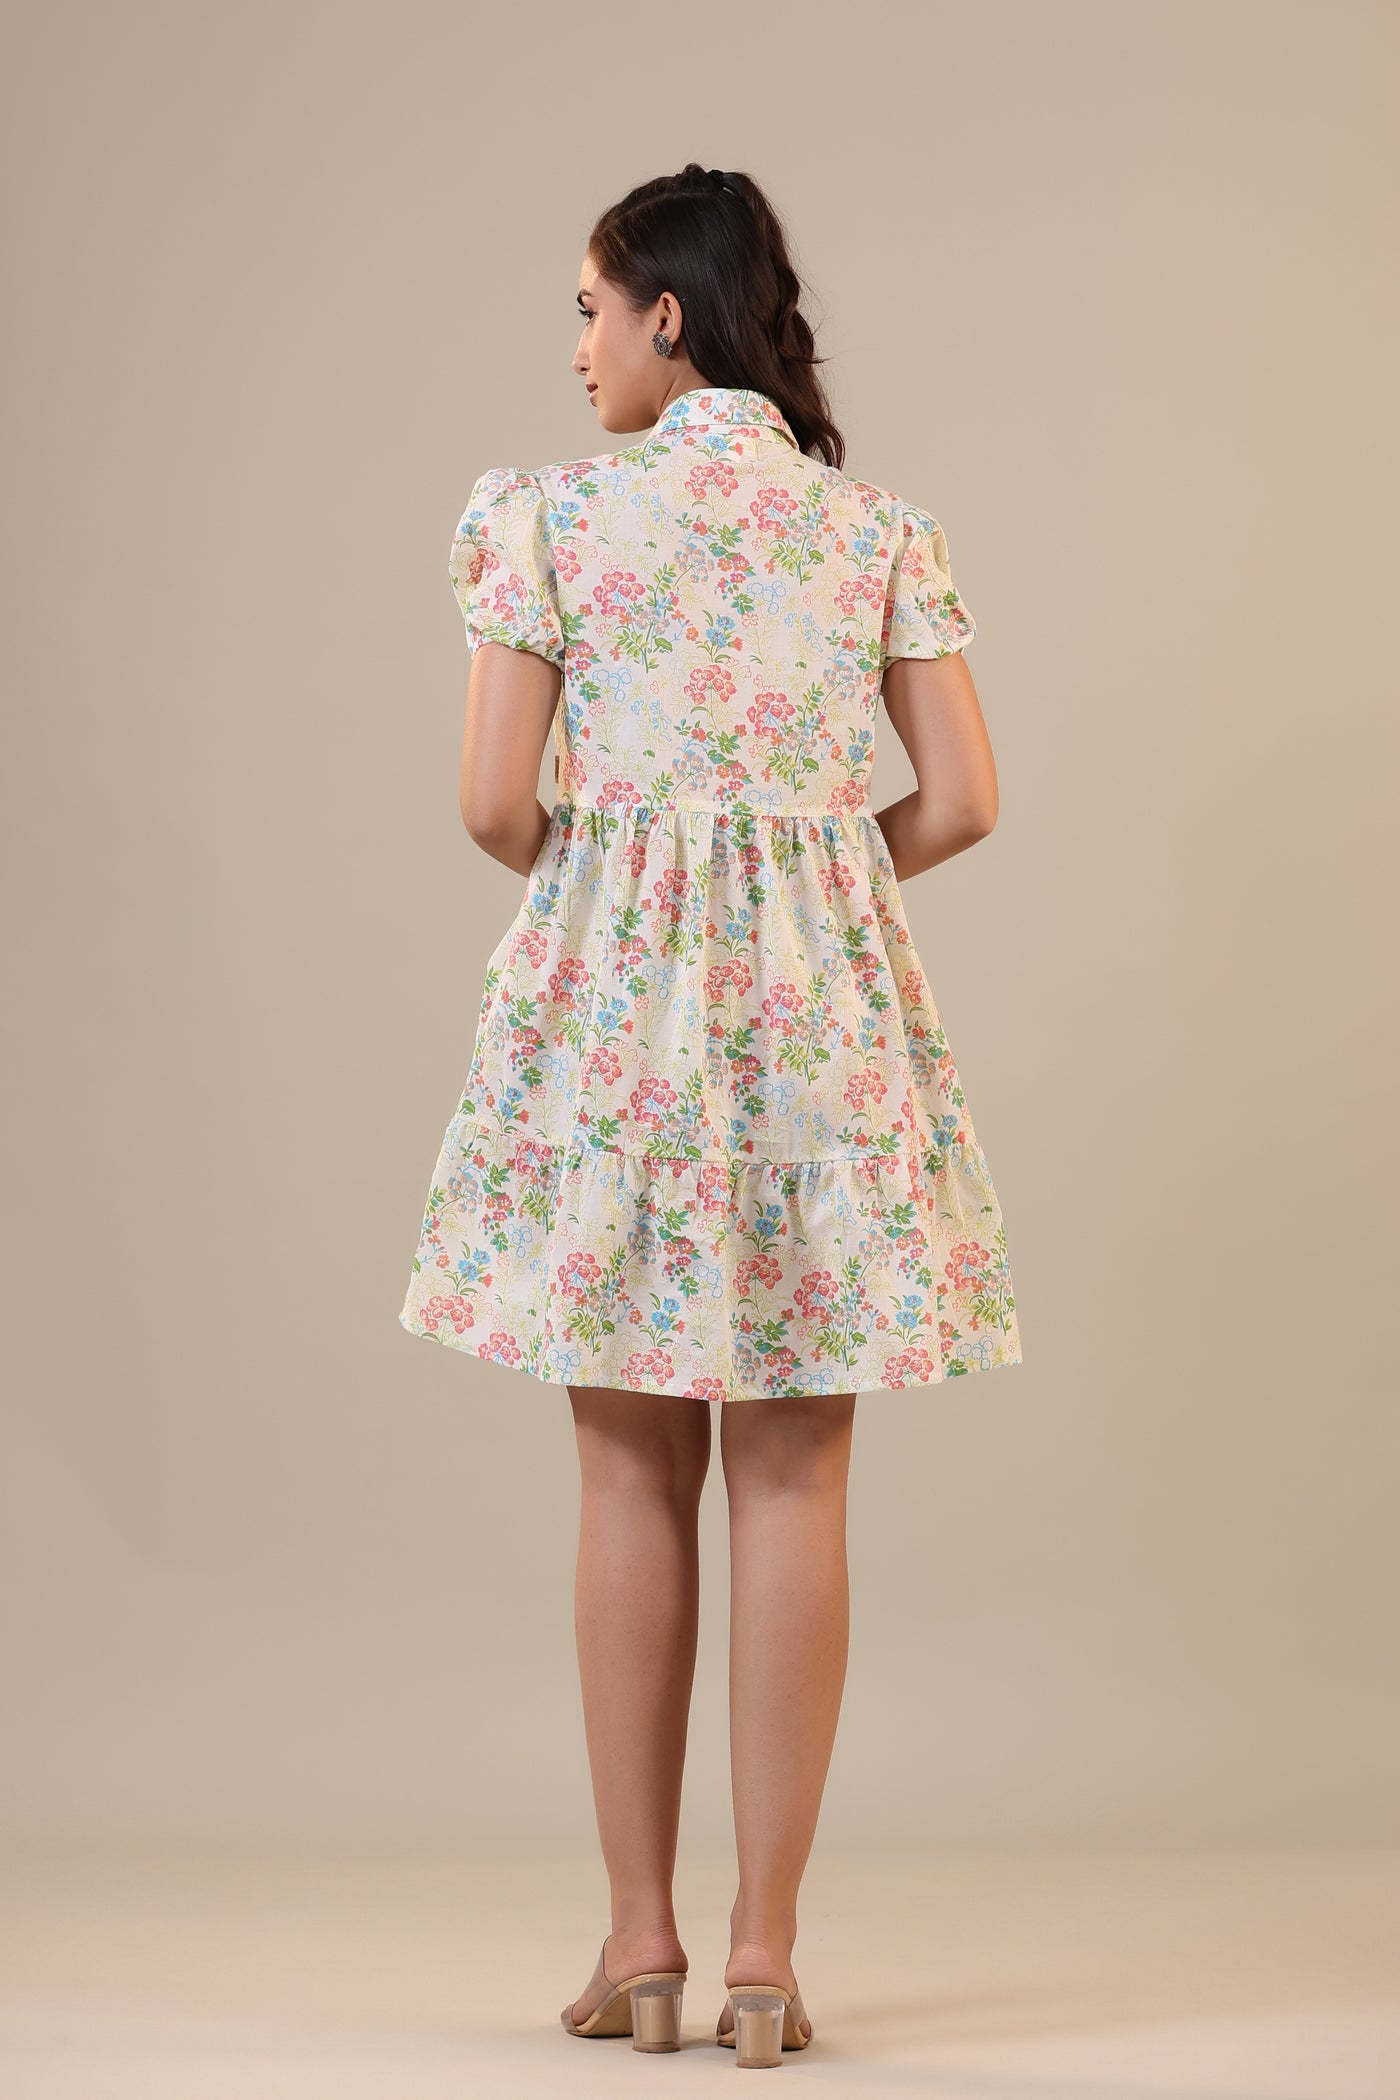 Floral Canopies on Off white Collared T-shirt dress